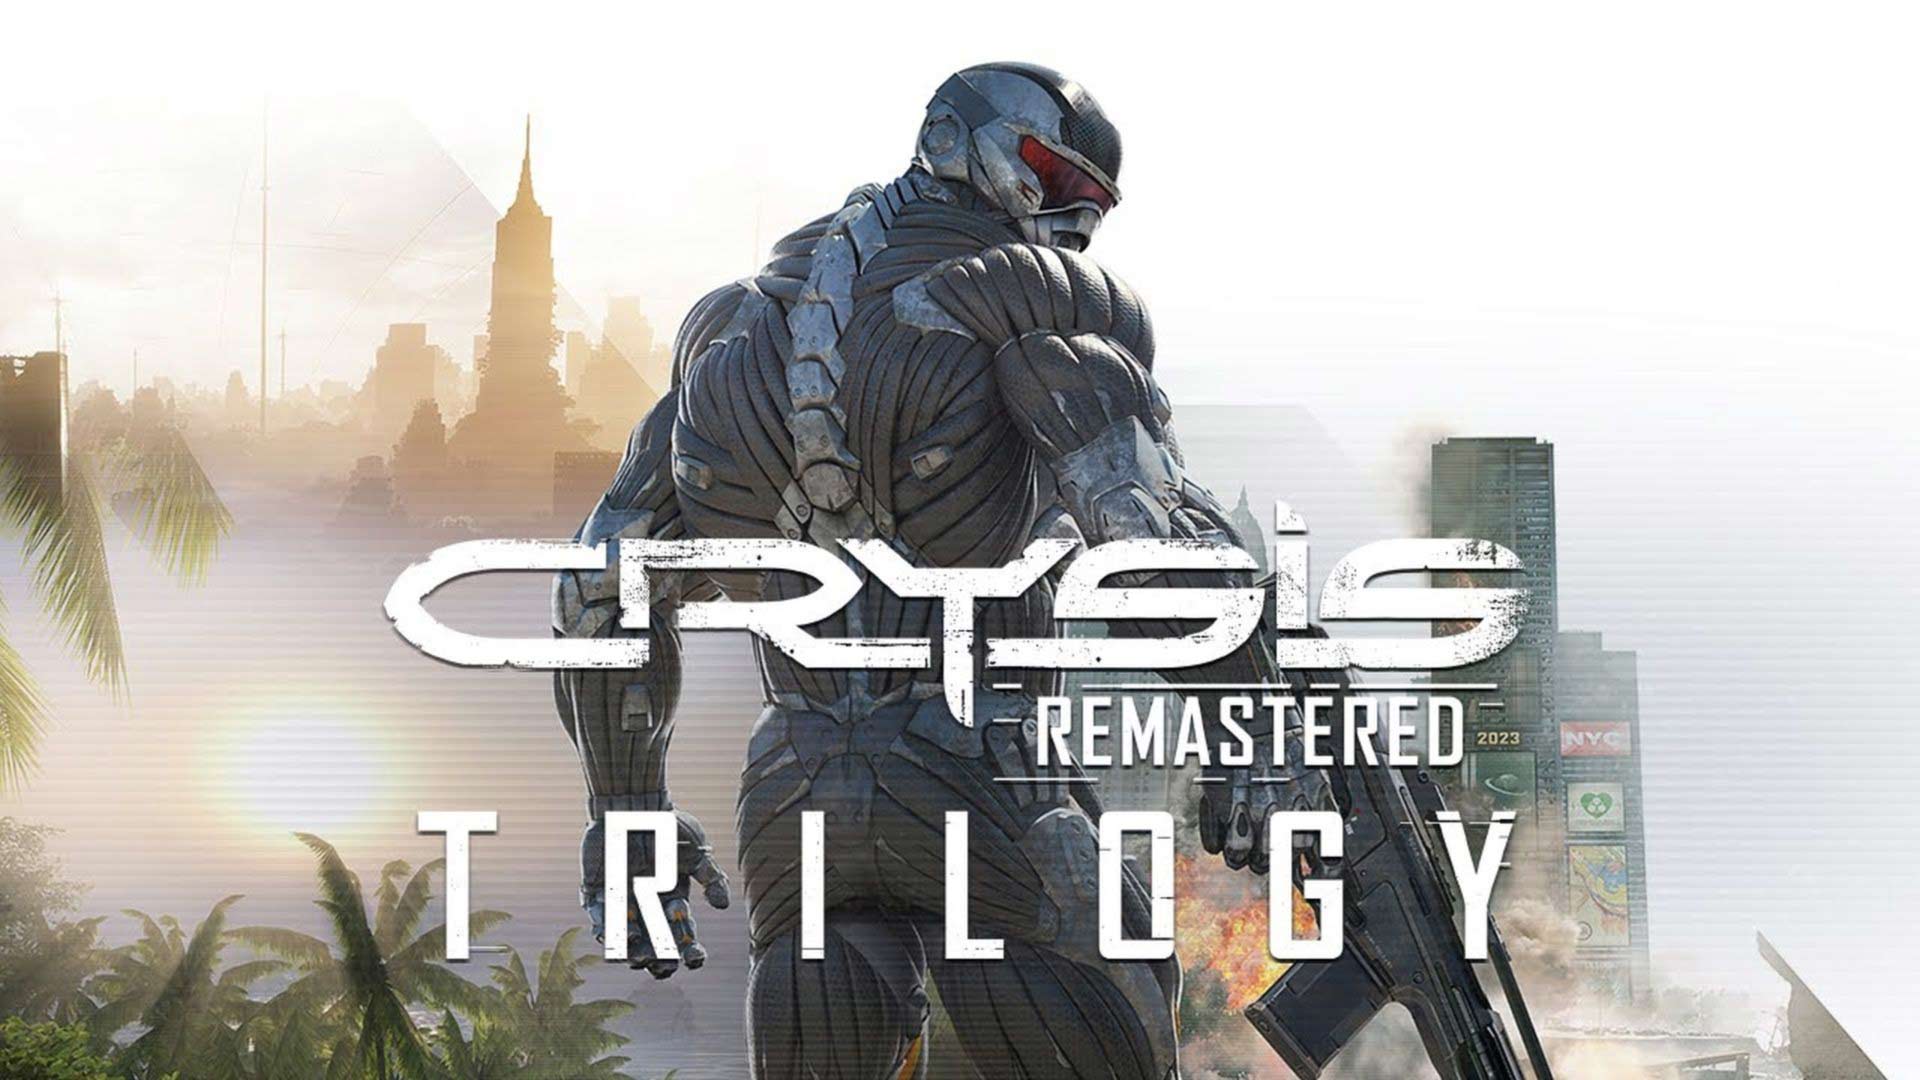 crysis 3 ps4 download